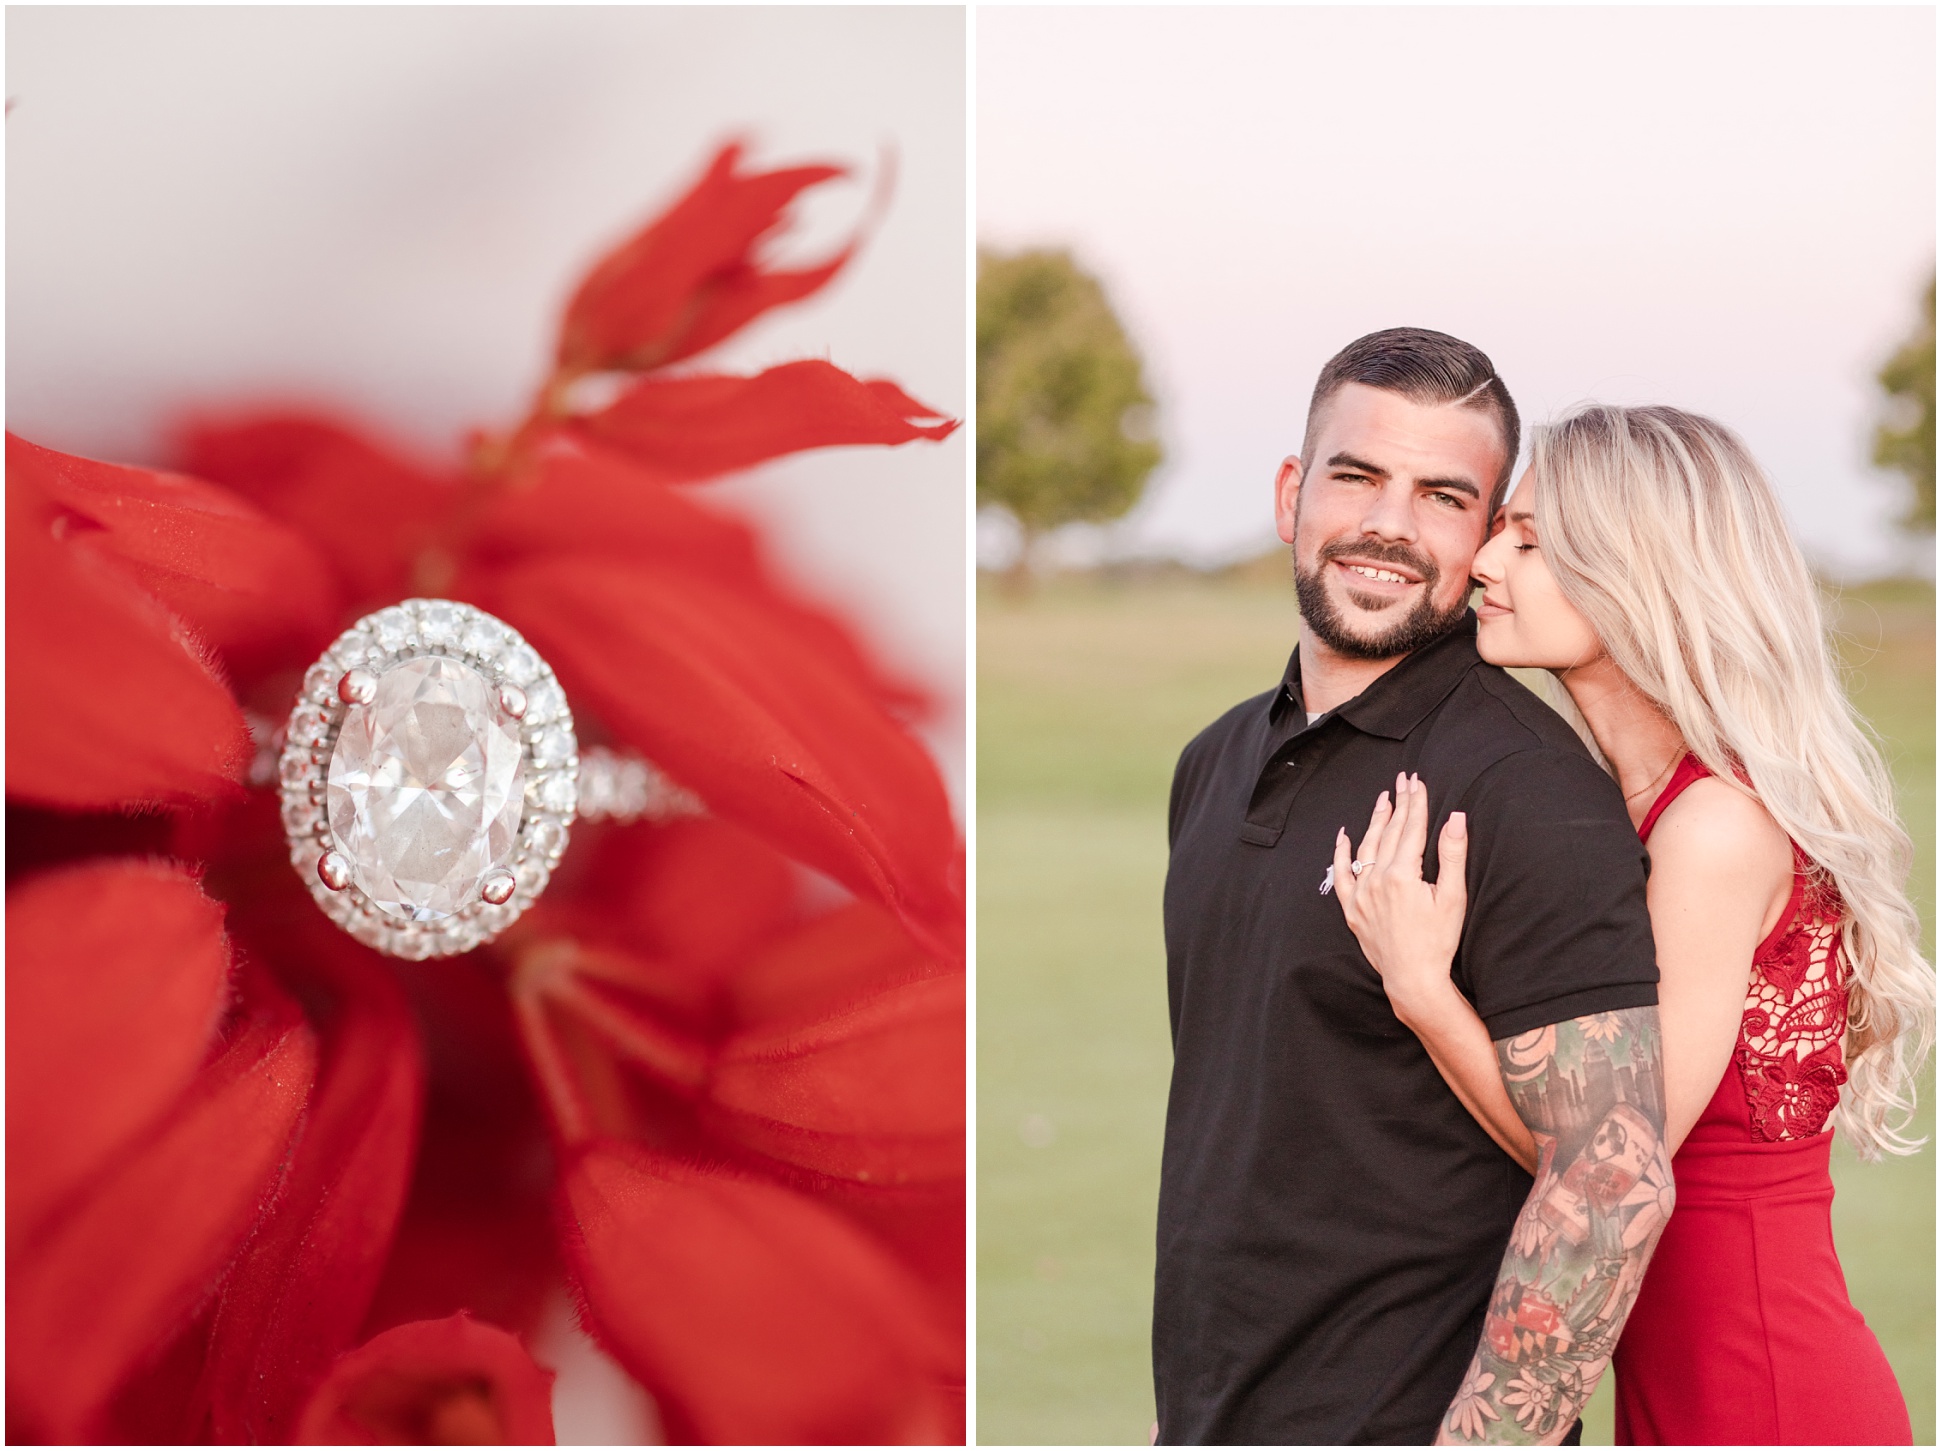 Two images from Landry and Bobby's engagement session in red